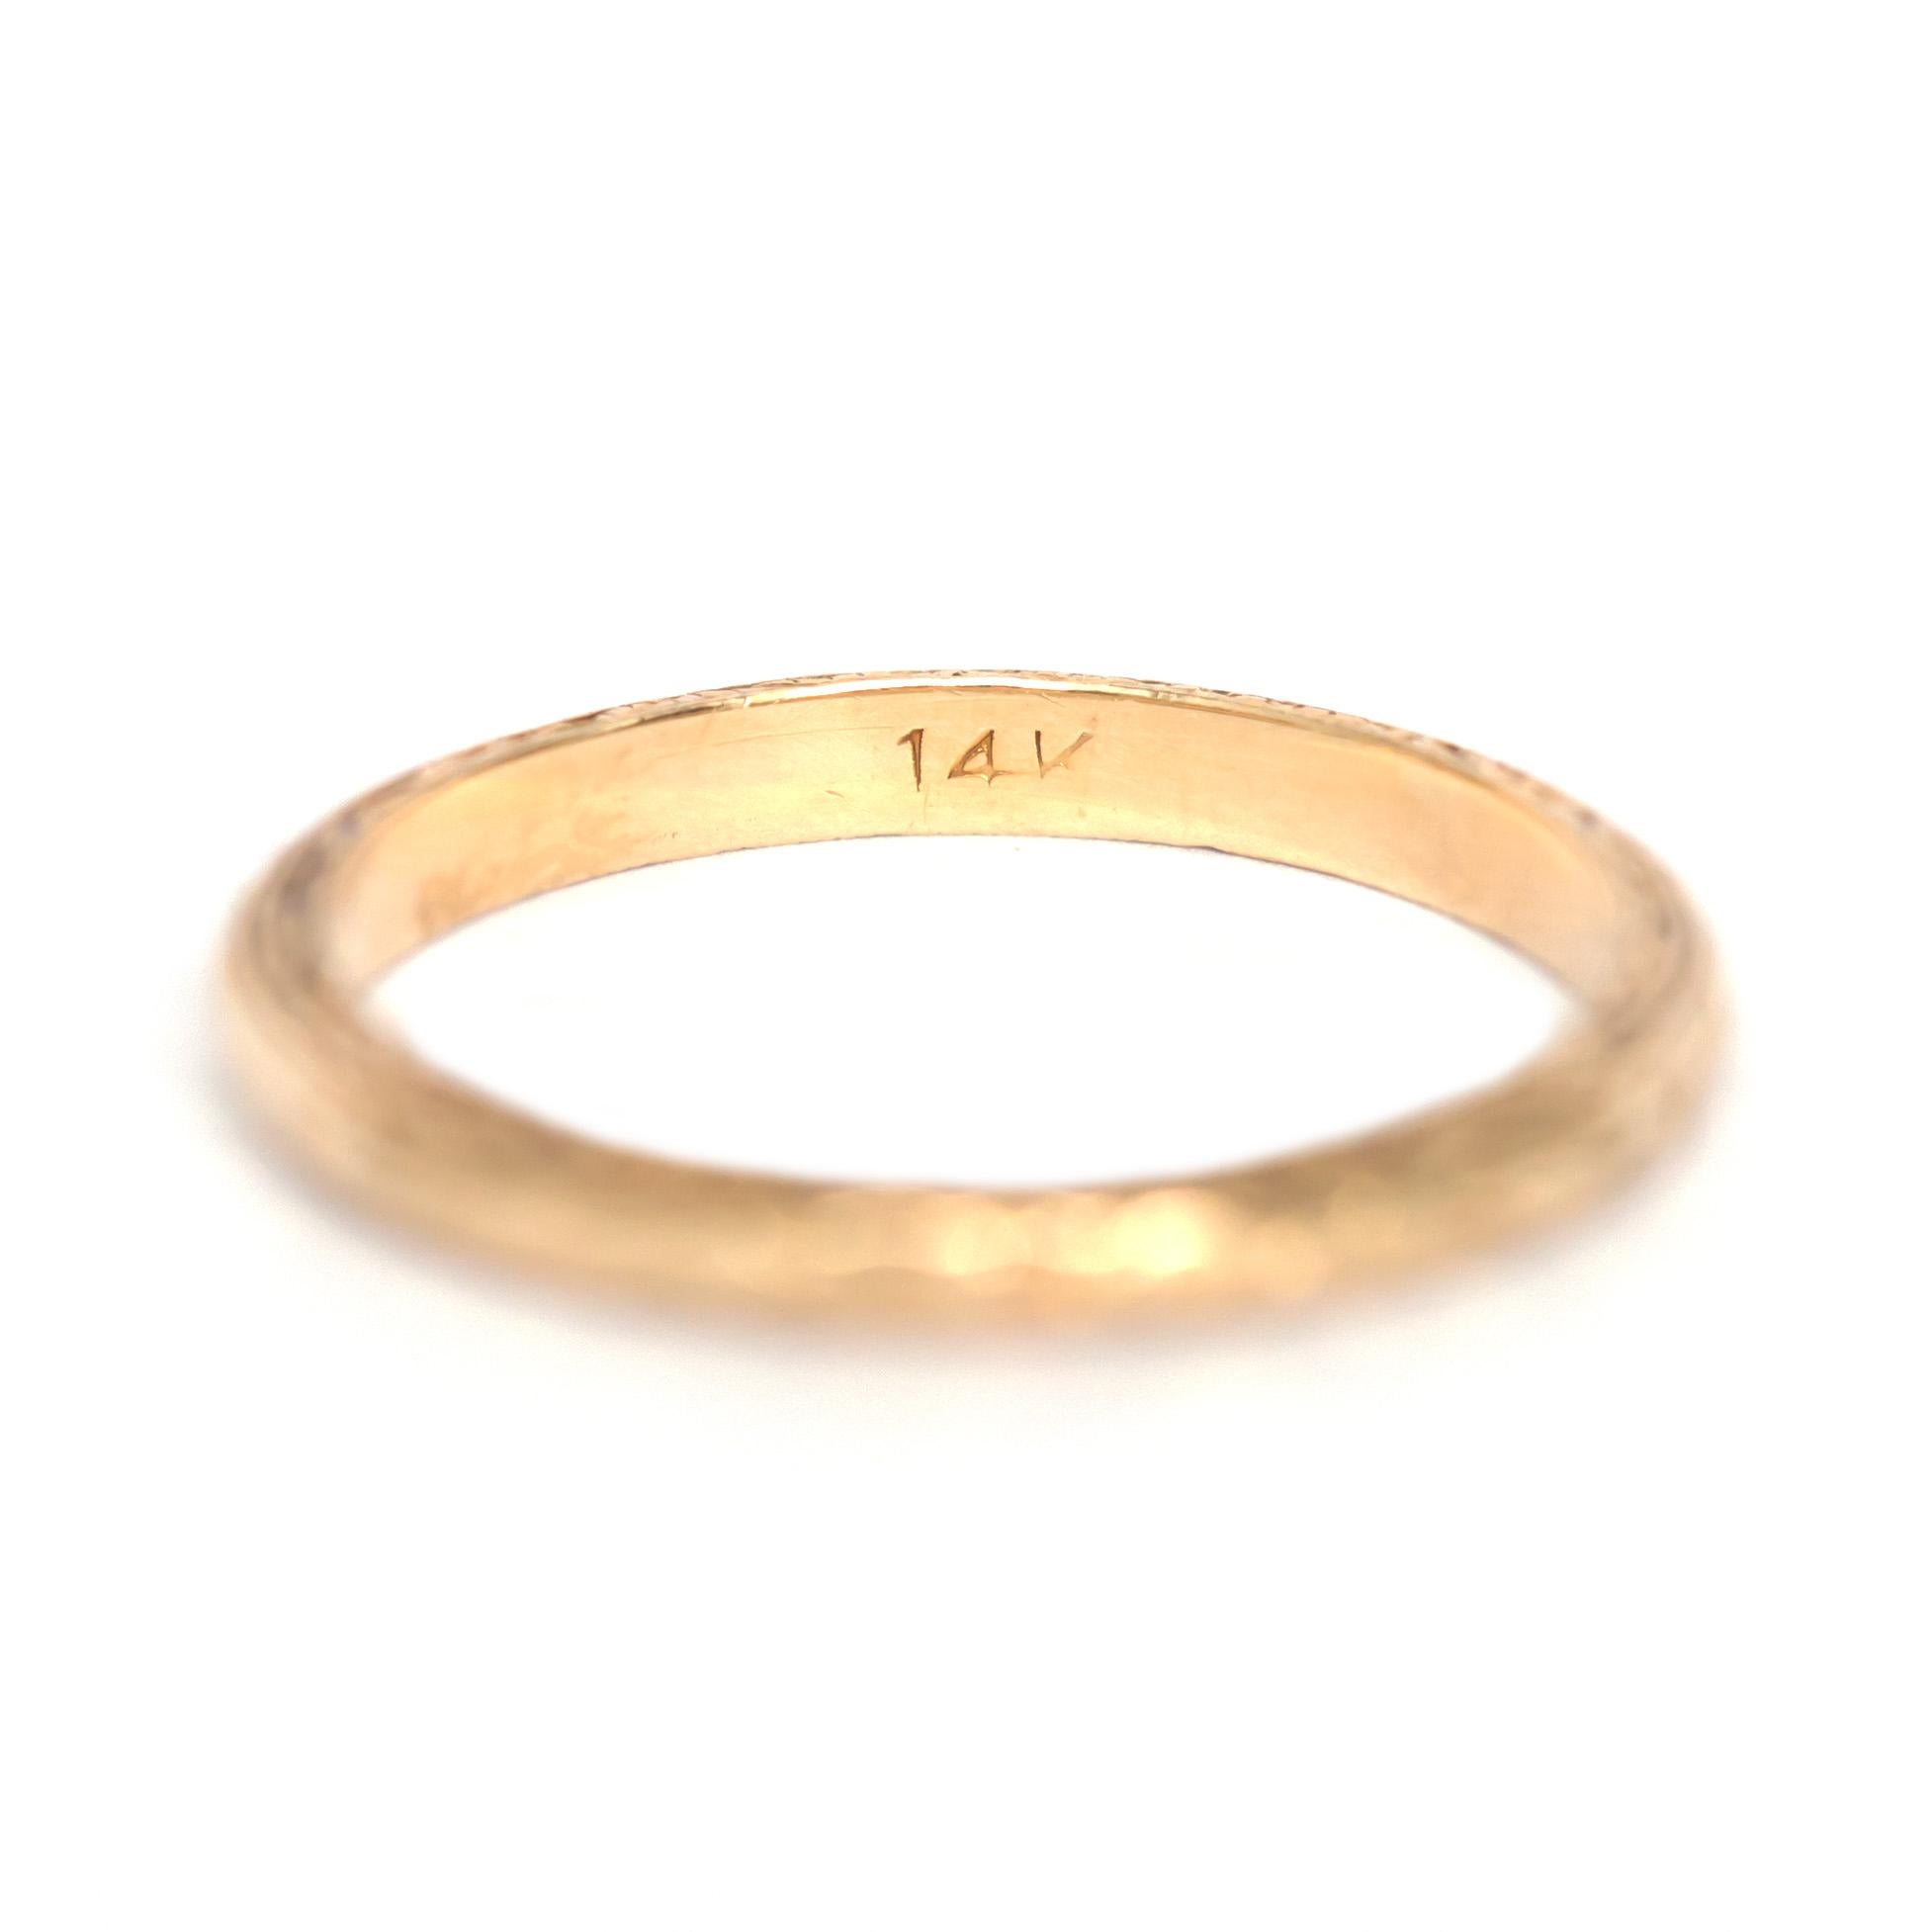 Item Details: 
Ring Size: 5
Metal Type: 14 karat Yellow Gold
Weight: 1.5 grams

Finger to Top of Stone Measurement: 1.40mm
Width: 2.08mm
Condition: Excellent